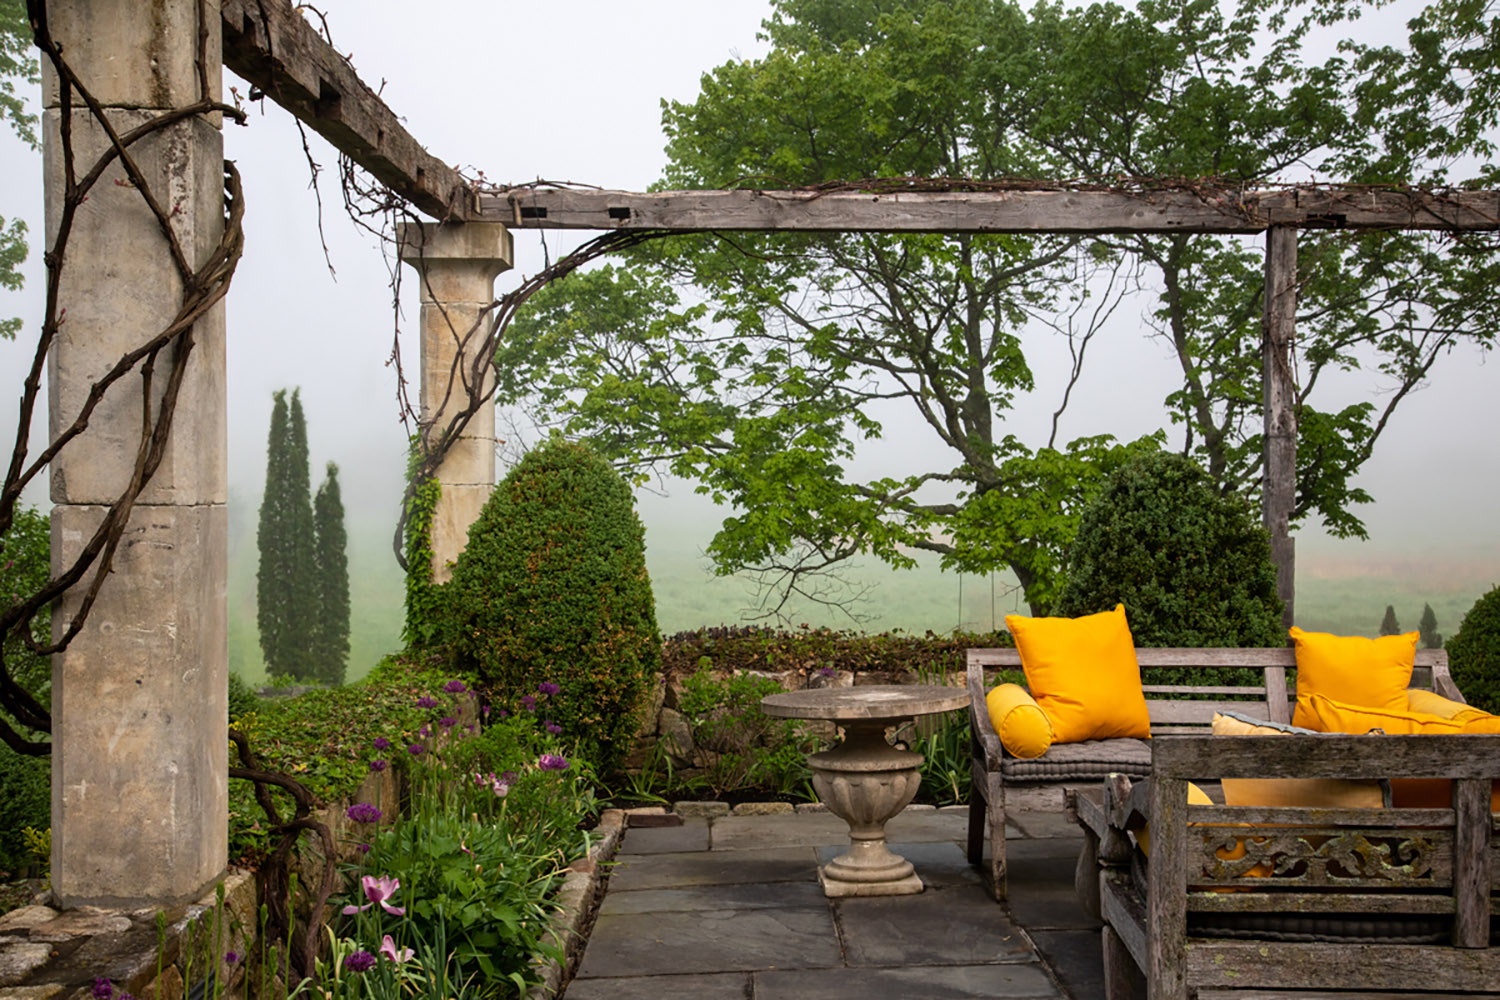 Yellow pillows light up a foggy outdoor space.